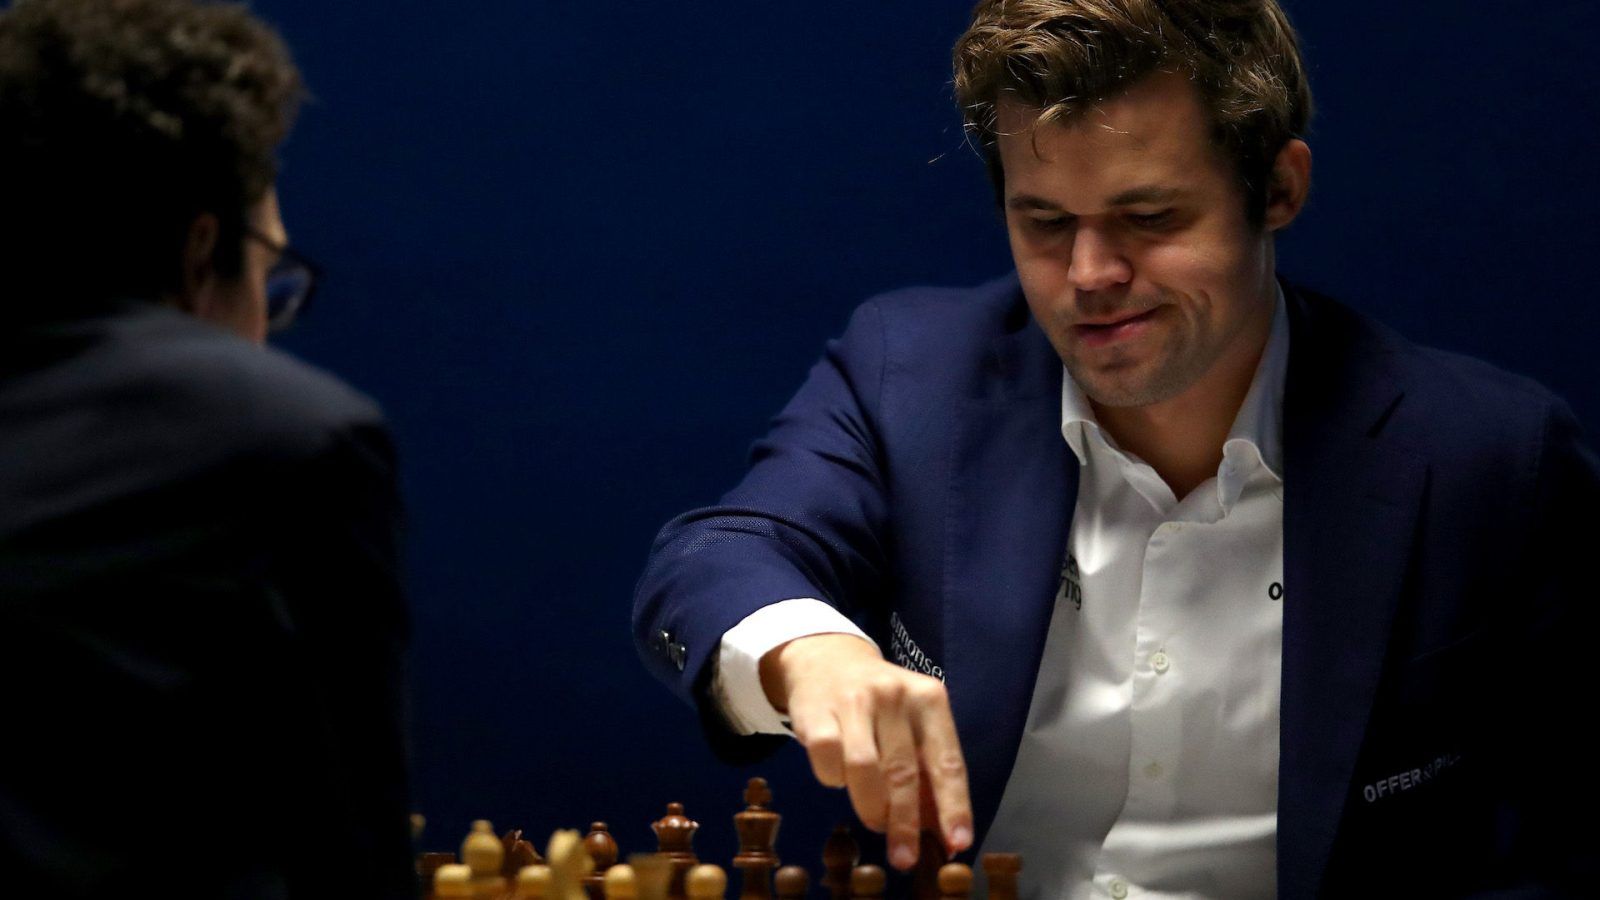 On Chess: Living the dream and reality of a professional chess player